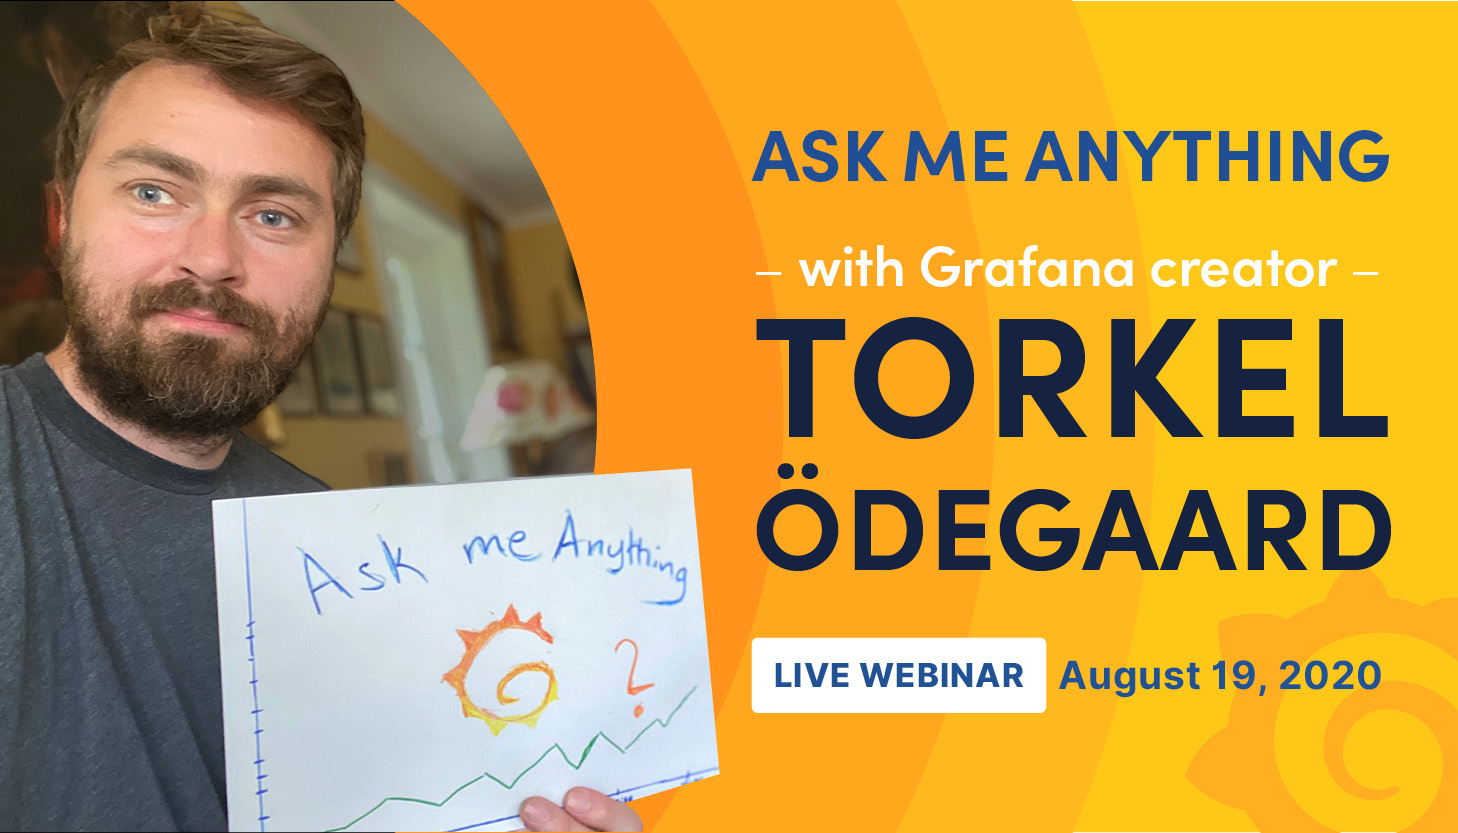 AMA session with Torkel